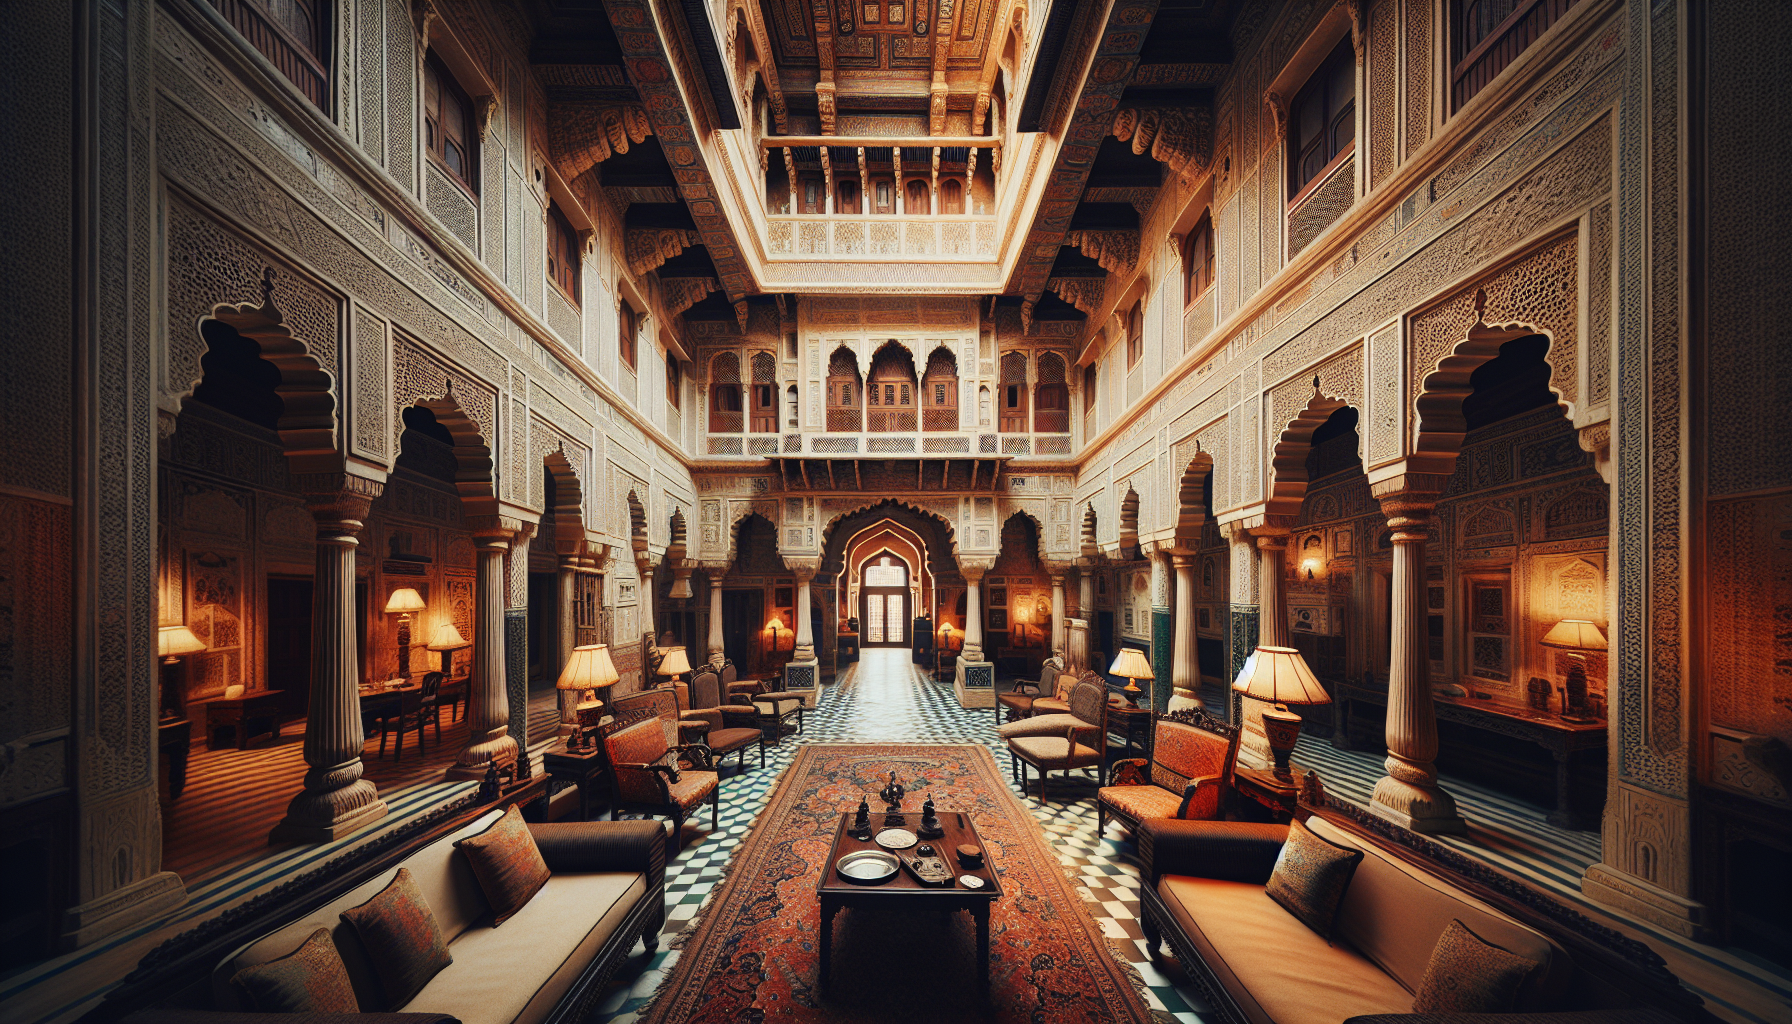 explore the intriguing stories and histories hidden within heritage hotels and uncover their captivating tales.